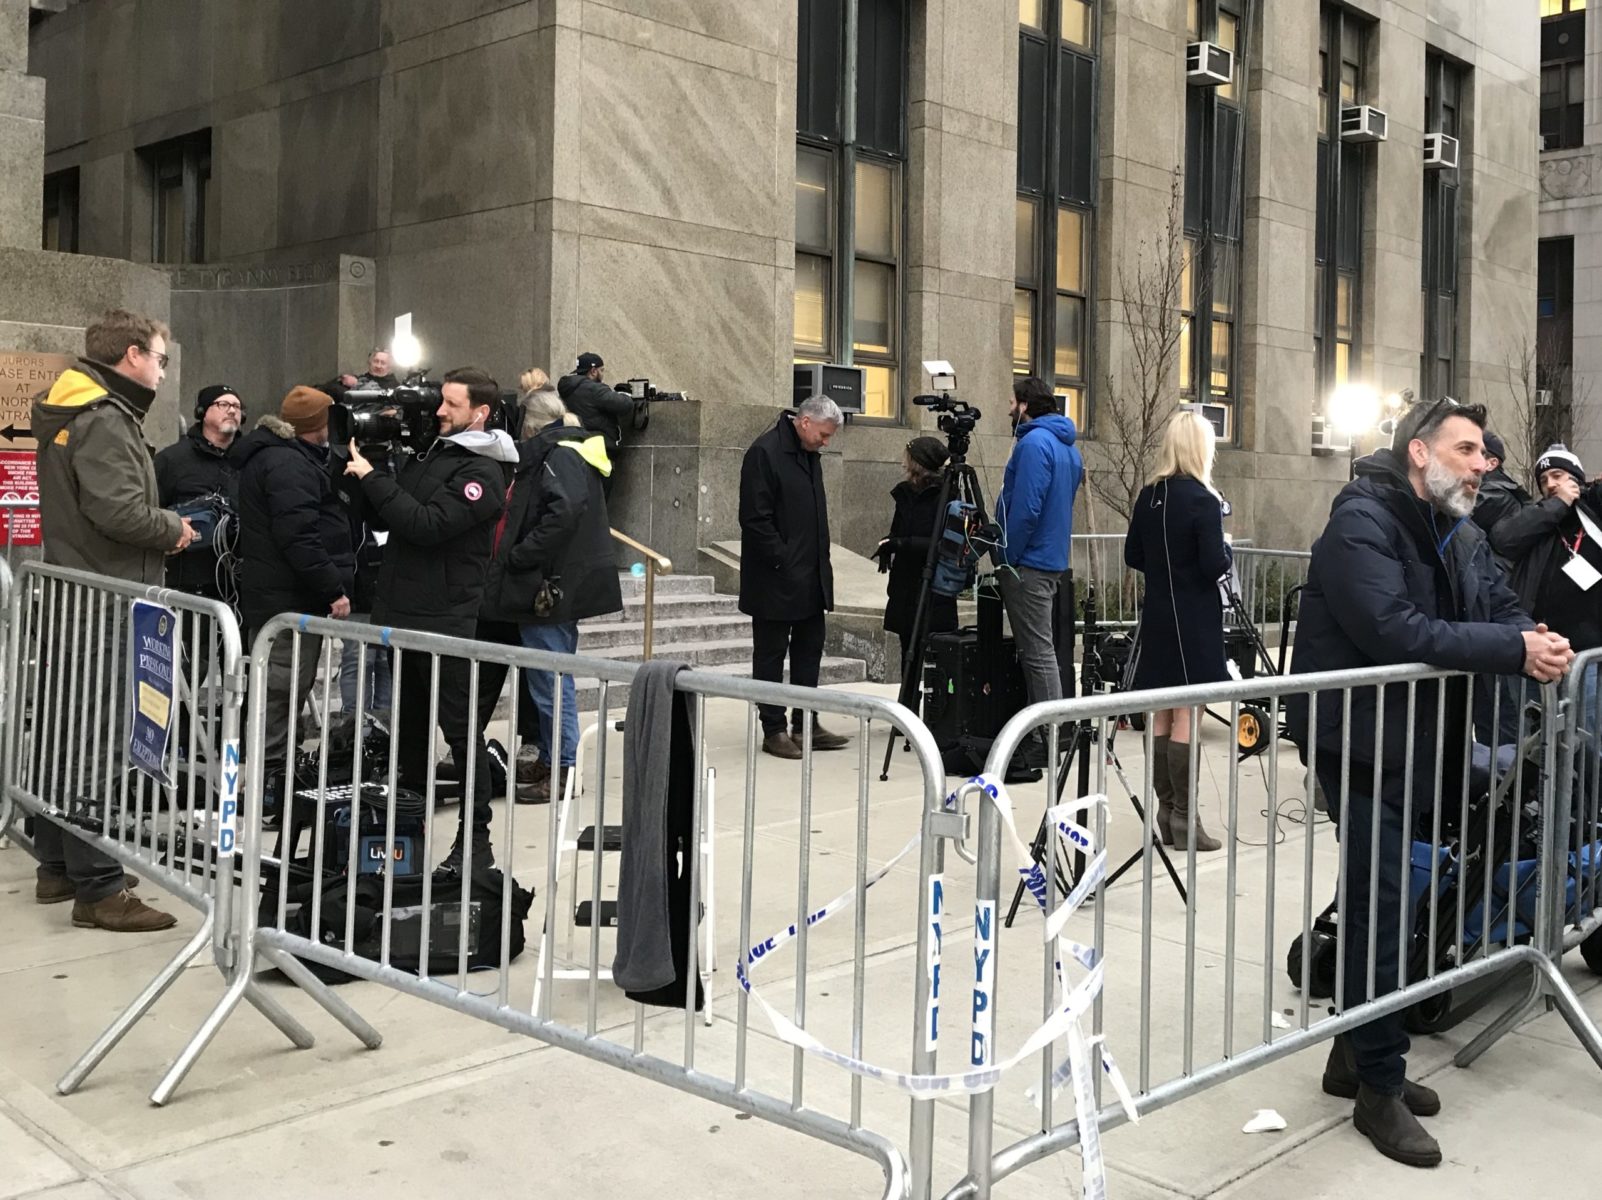 The Sidewalk outside the courthouse is lined with TV cameras, metal barriers and wires / Photo by Caroline Chen for NY City Lens